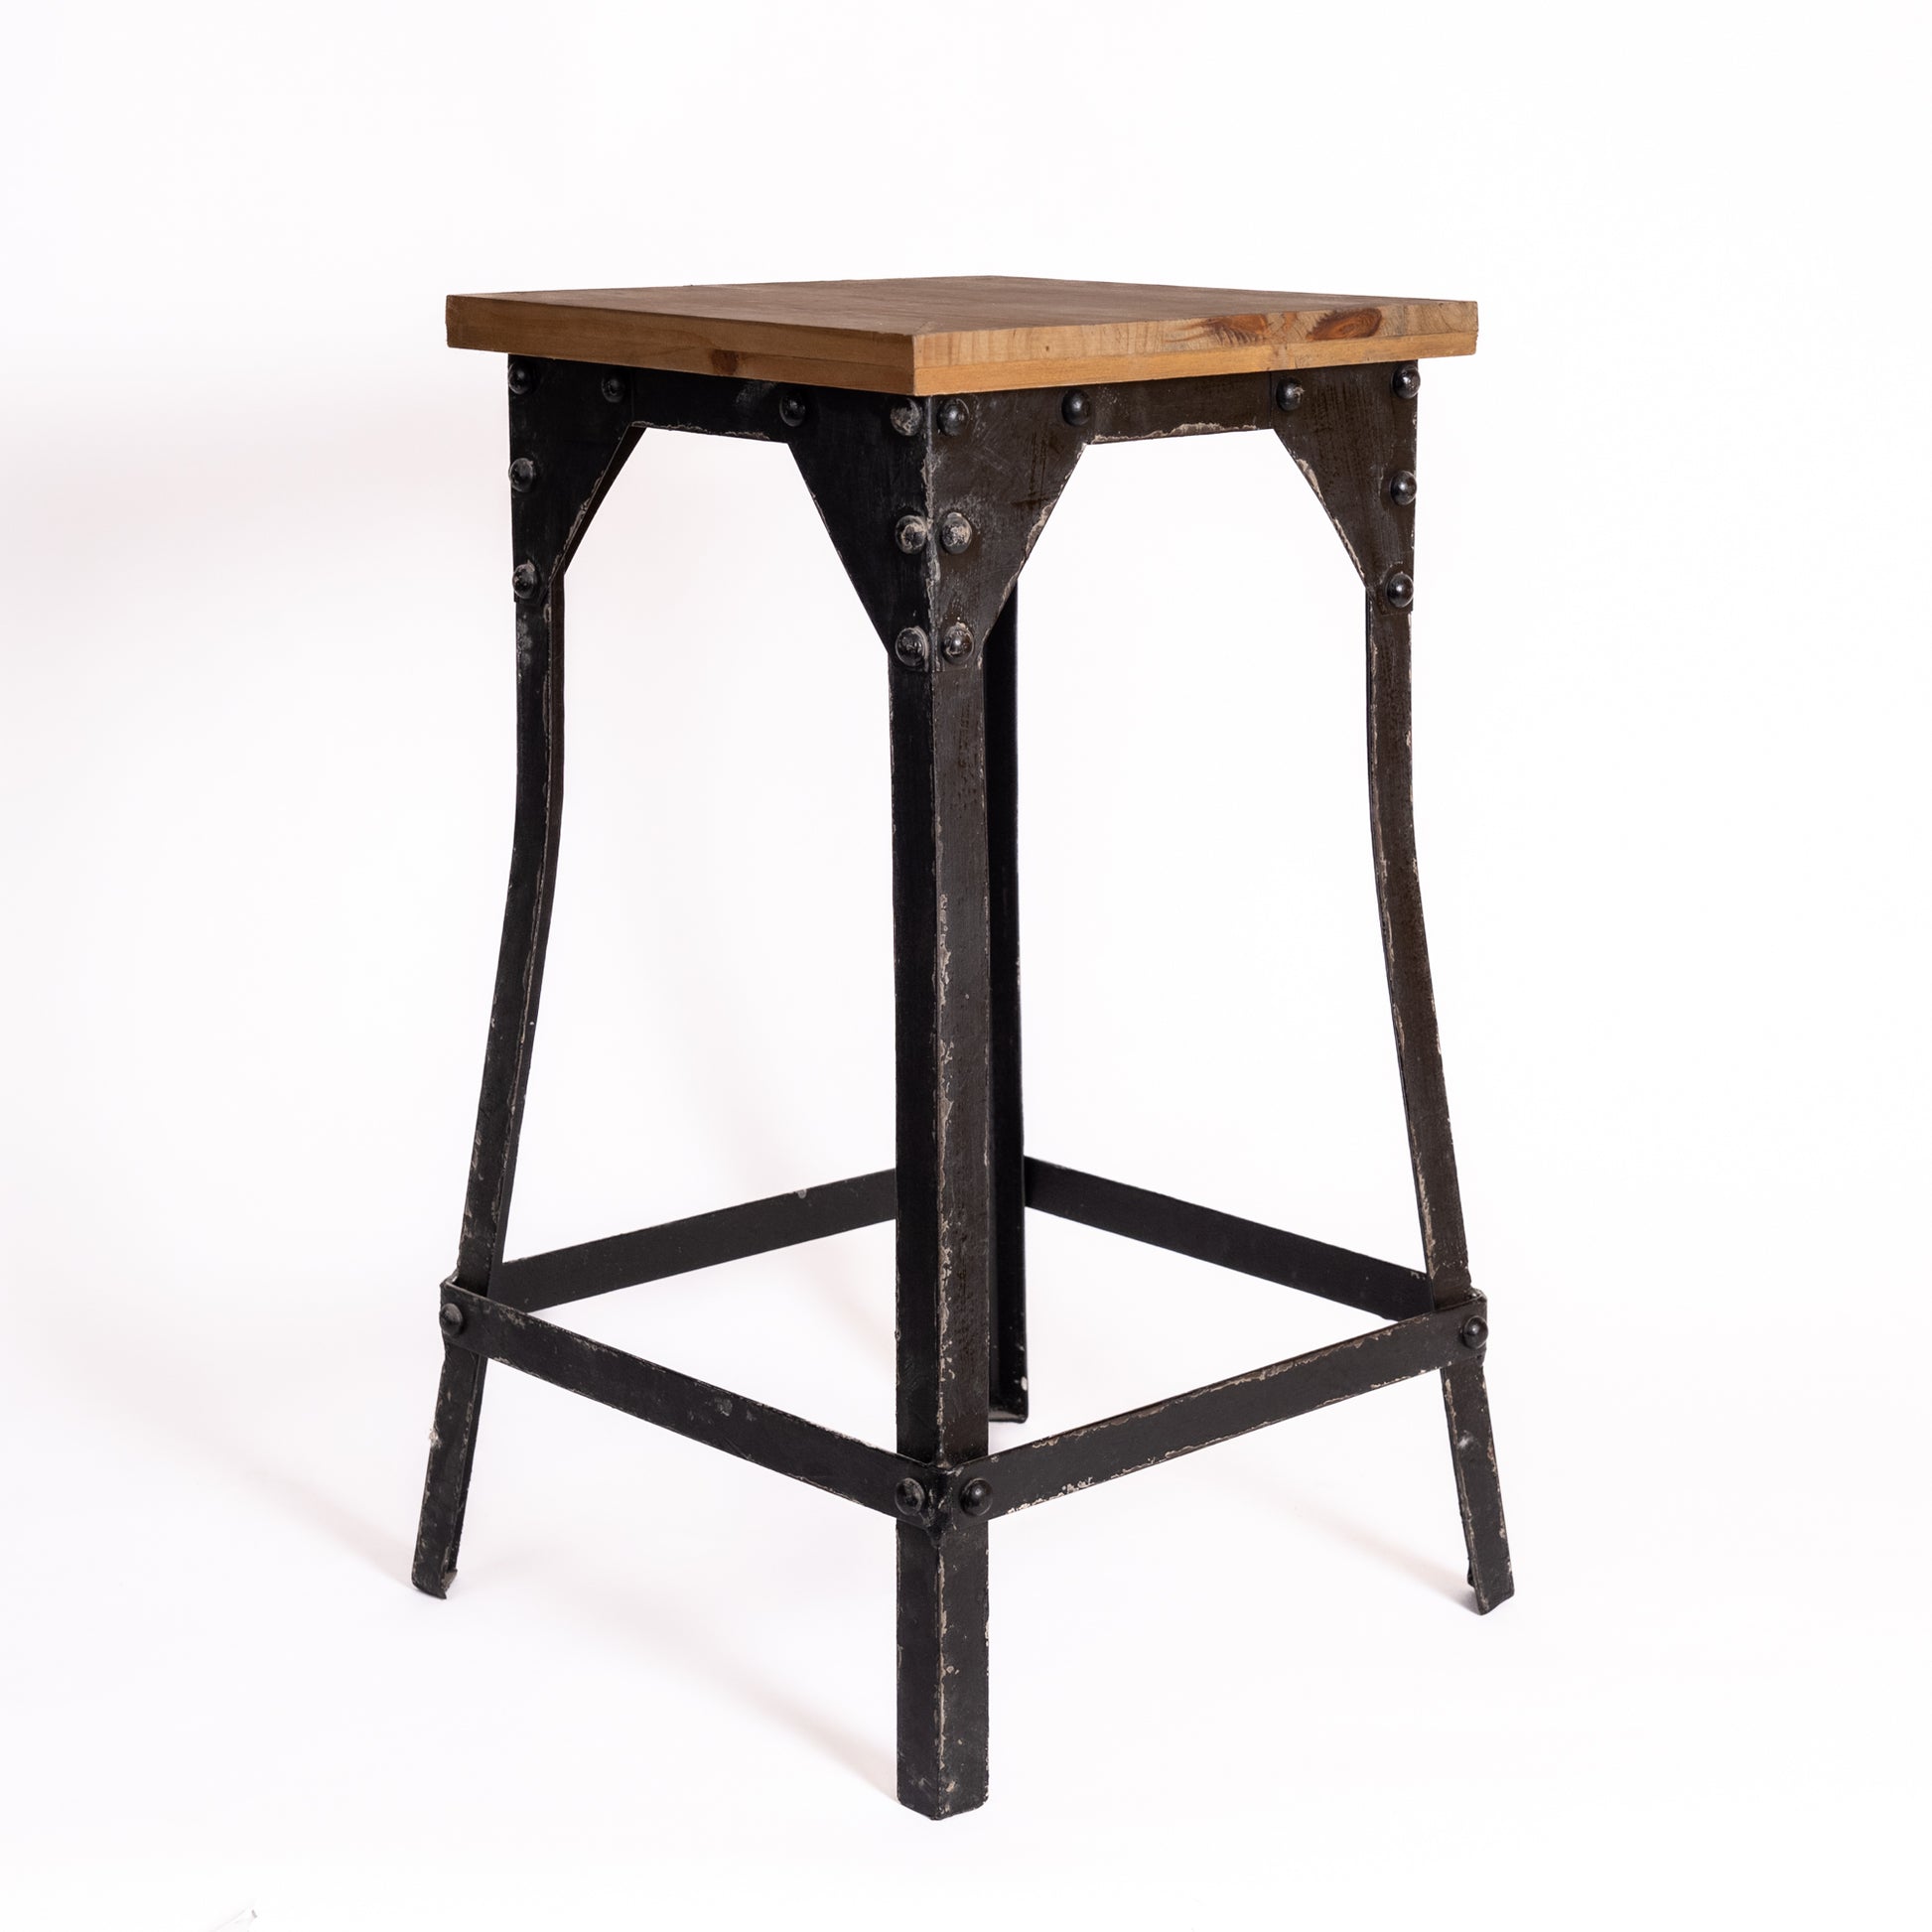 Antique stool with wooden seat